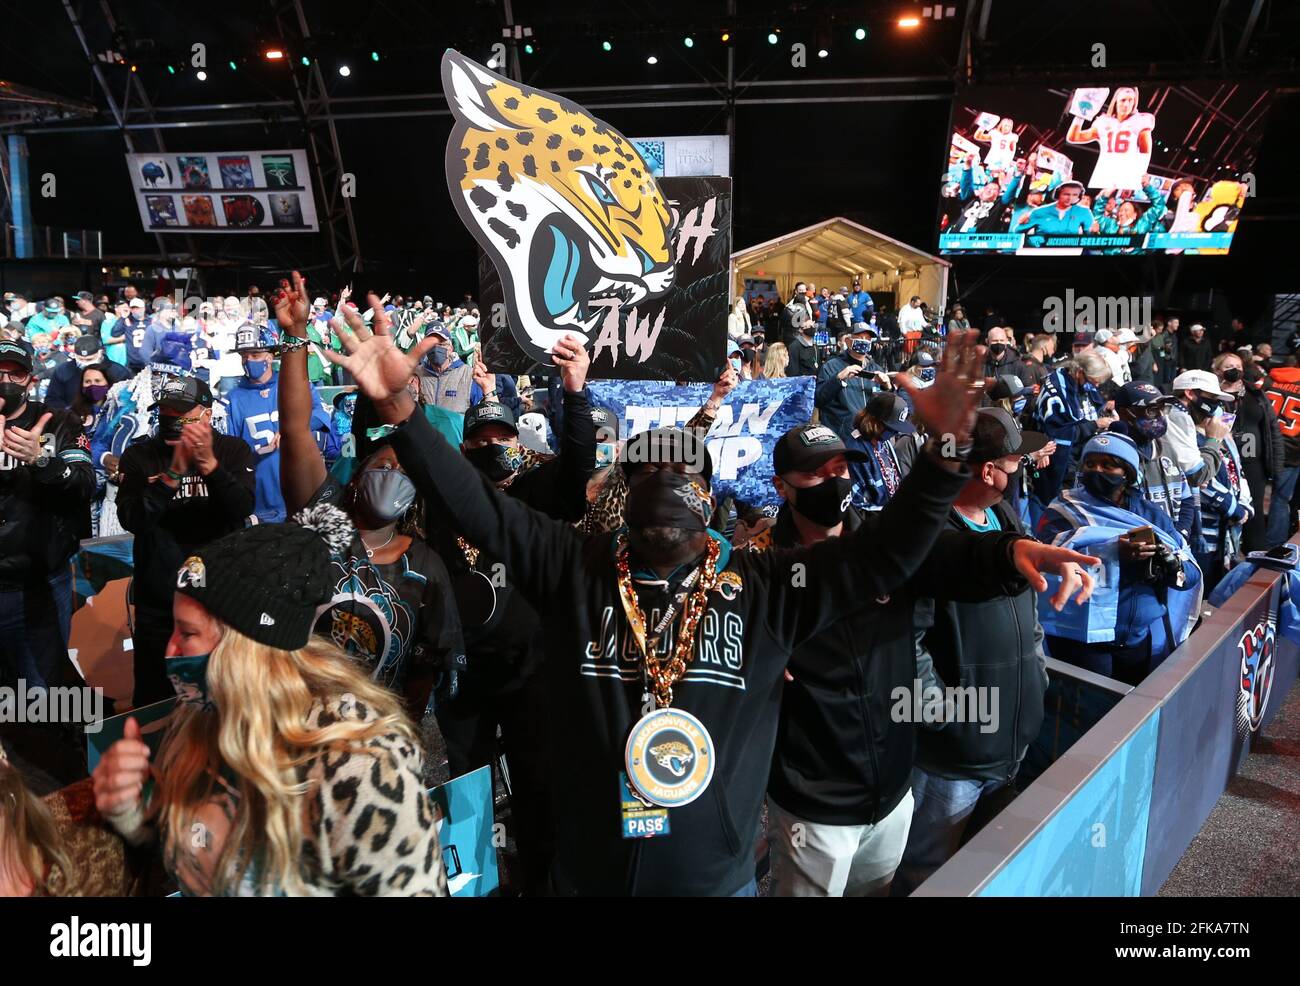 Cleveland, United States. 29th Apr, 2021. Fans celebrate as the Jacksonville Jaguars select Clemson quarterback Trevor Lawrence with the number #1 pick at the 2021 NFL Draft in Cleveland, Ohio on Thursday, April 29, 2021. Photo by Aaron Josefczyk/UPI Credit: UPI/Alamy Live News Stock Photo